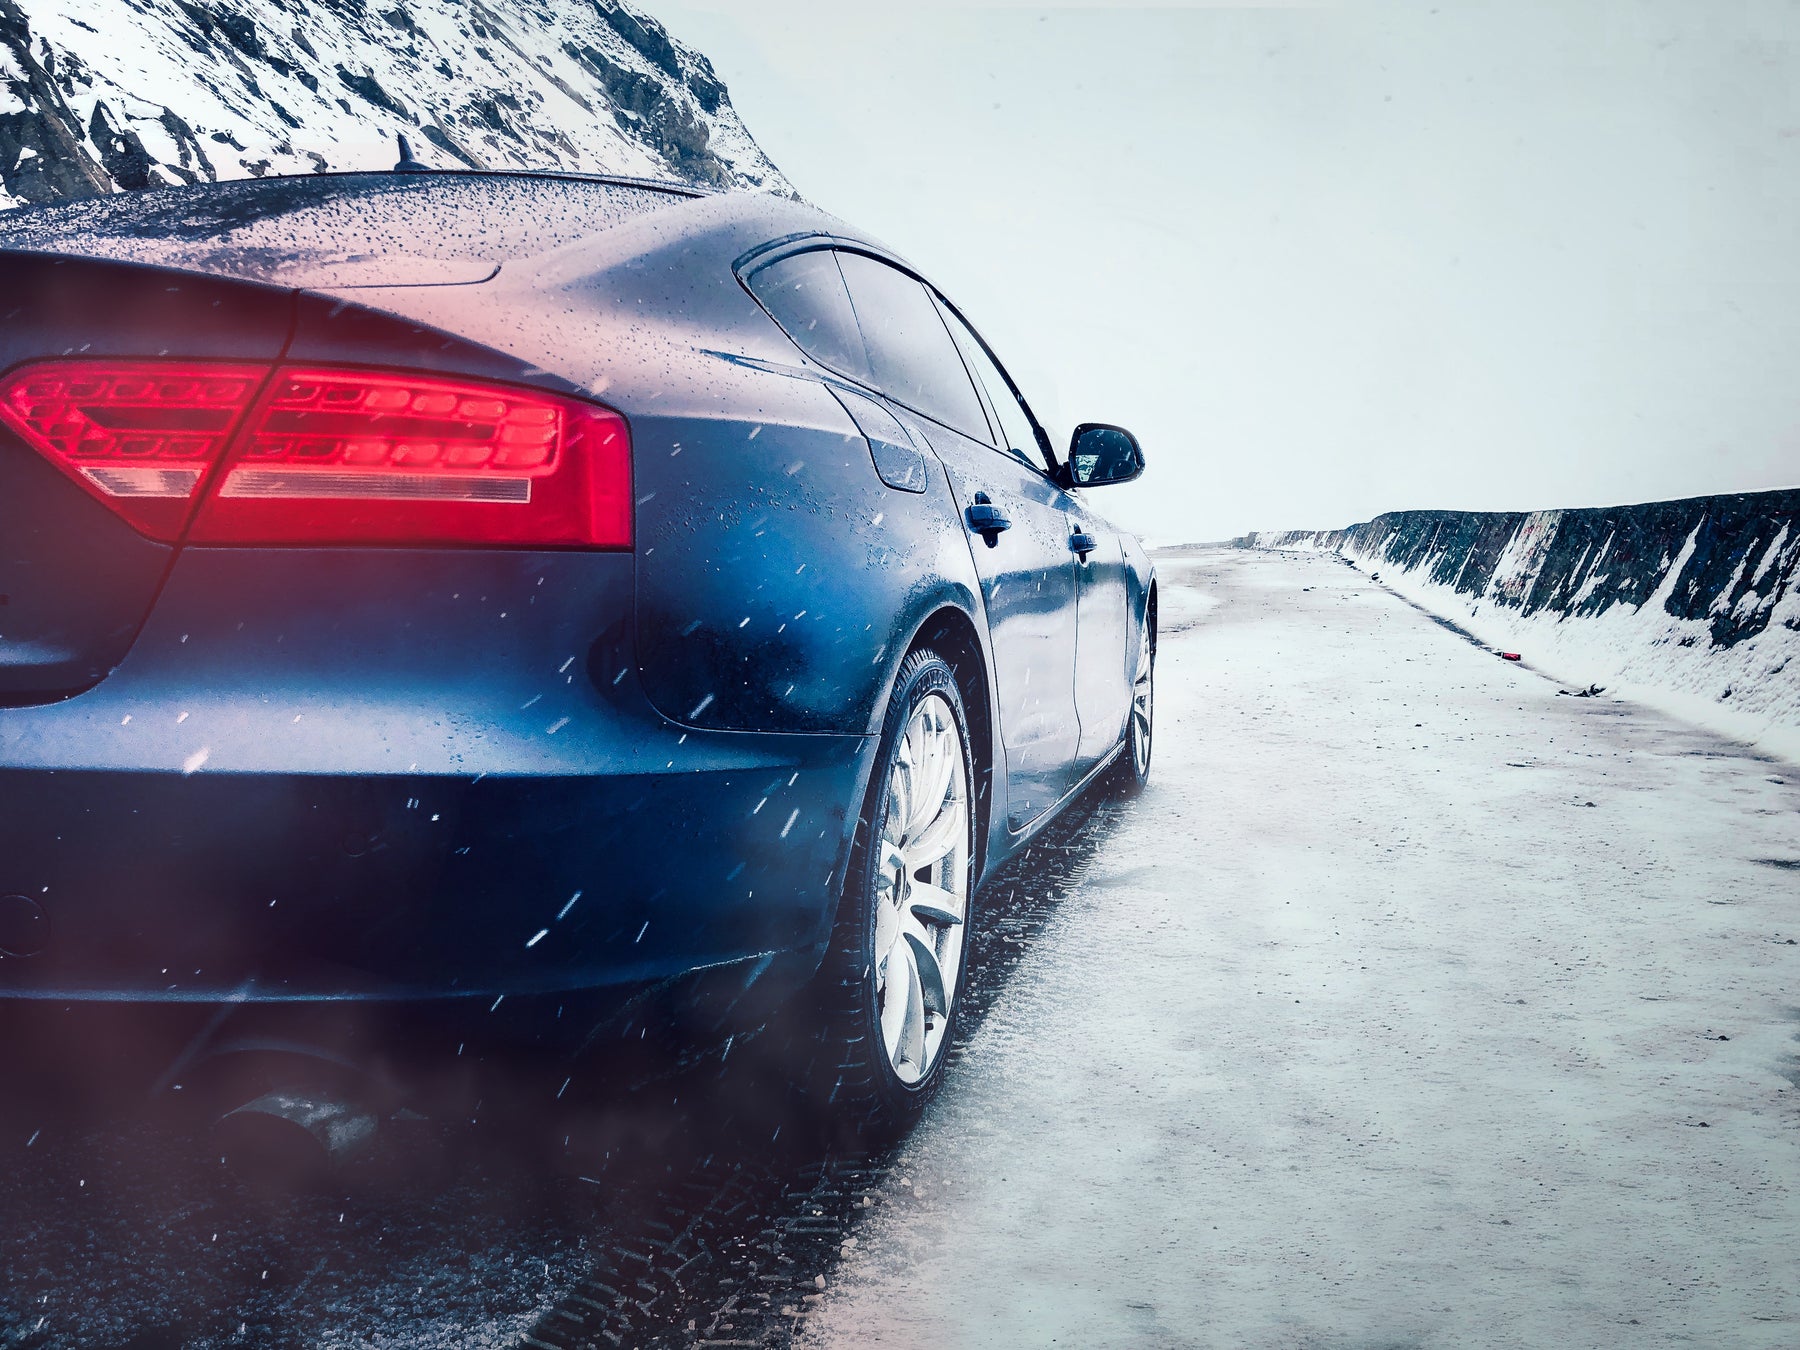 Best UK Winter Products for Your Car